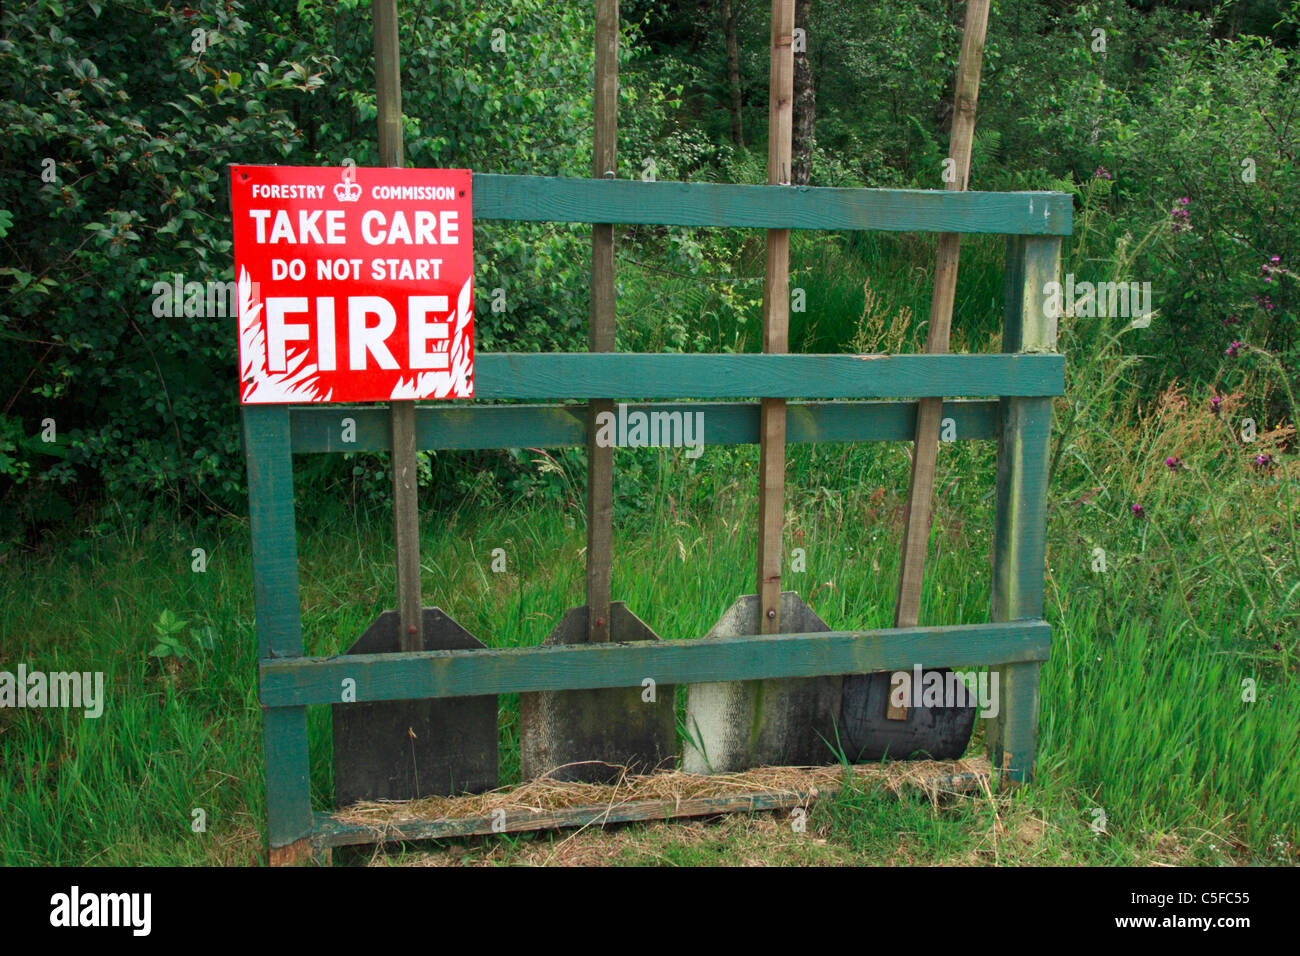 Fire beaters in Forestry Commission forest, Scotland. Stock Photo